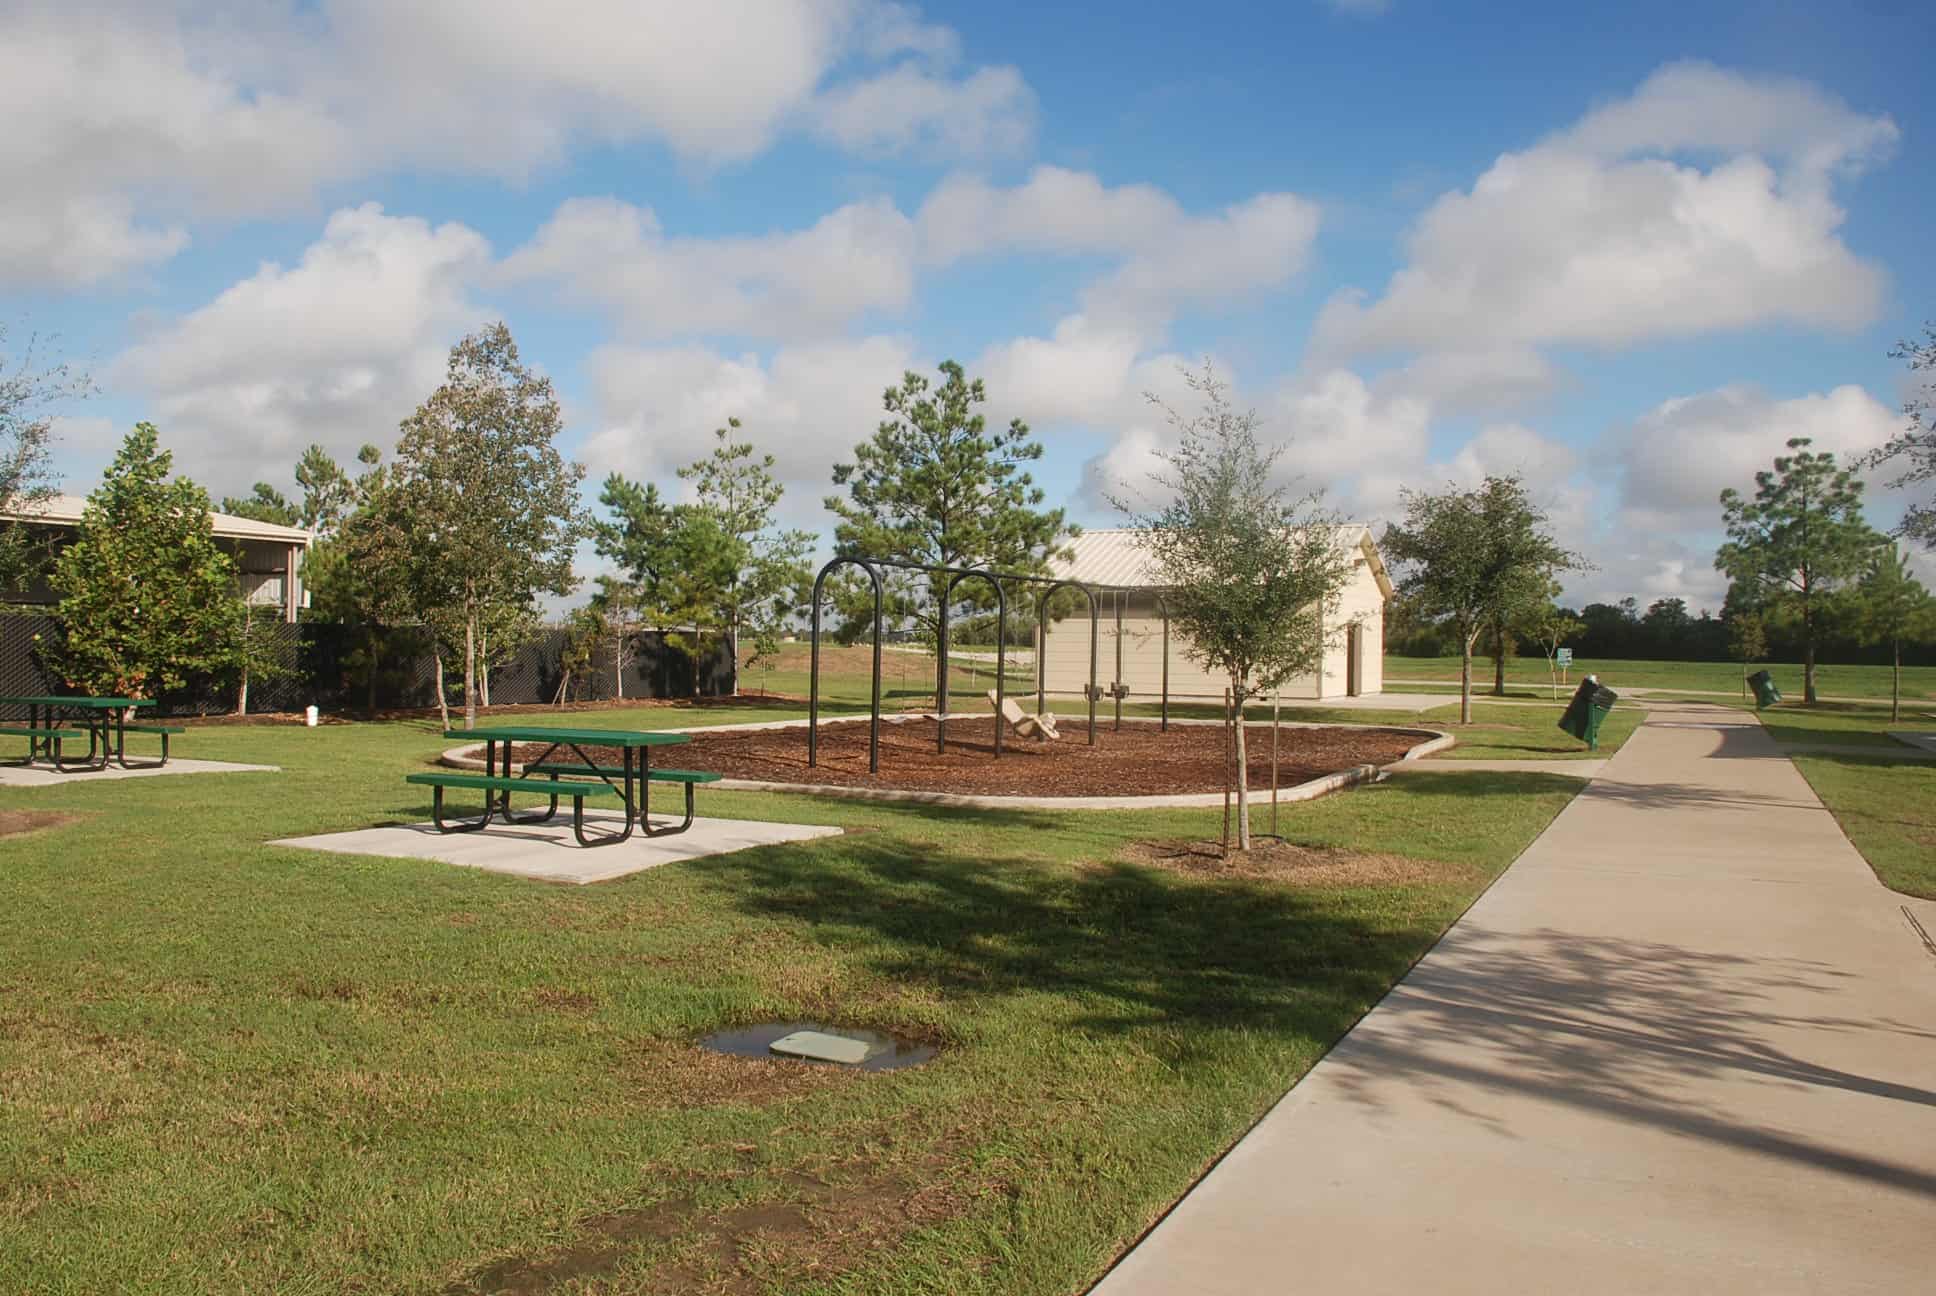 Swingset and Picnic Area adjacent to Fitness Area